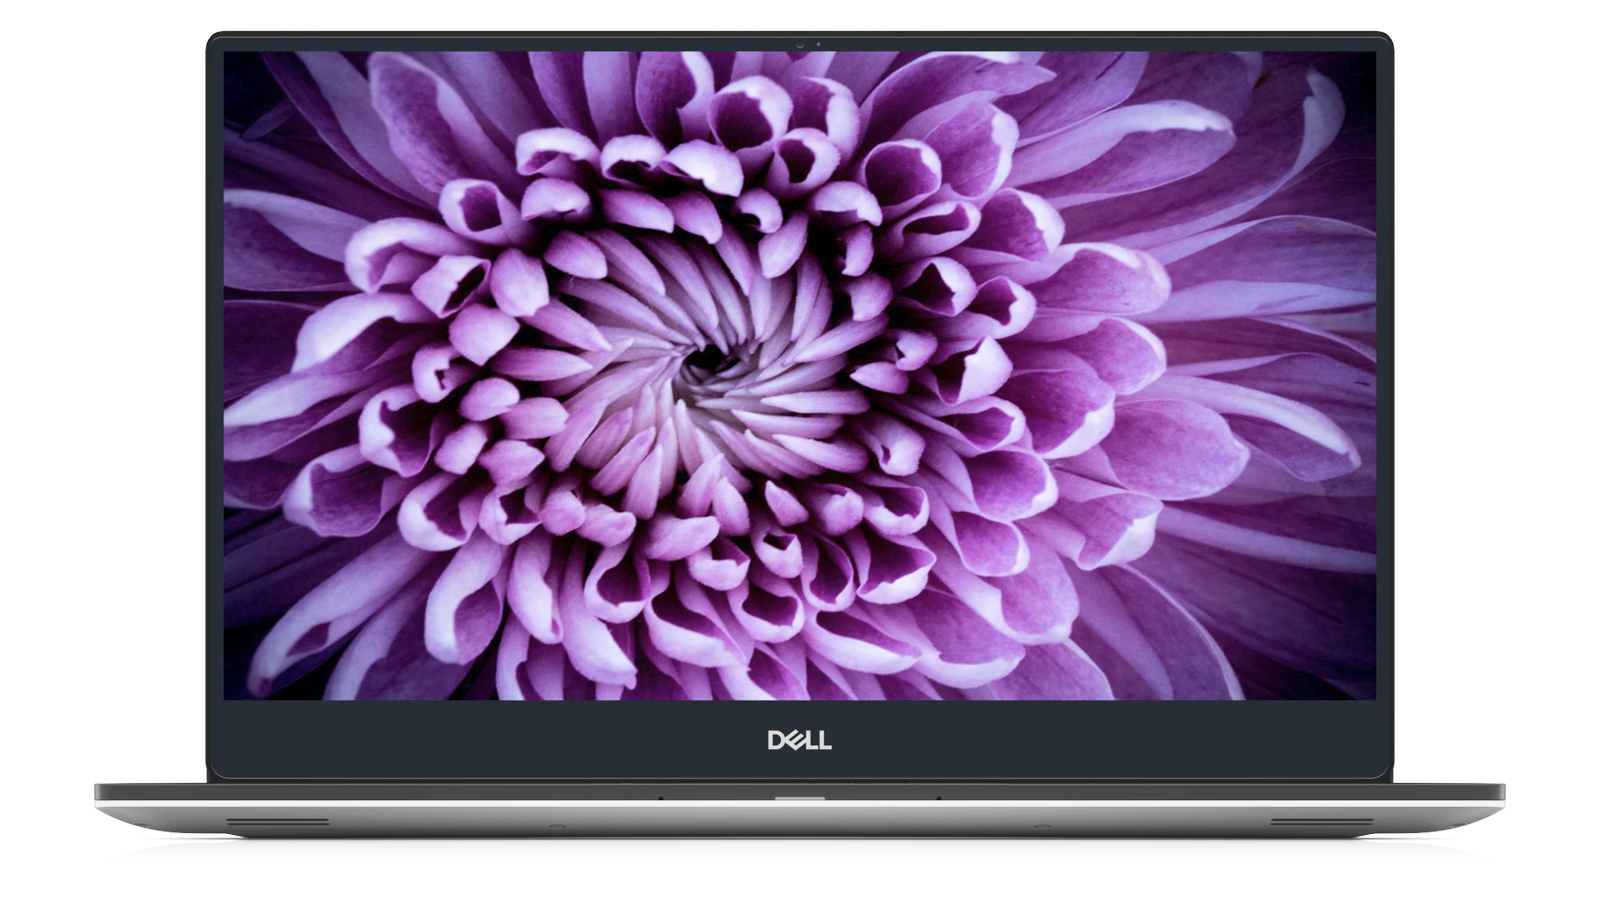 A Dell XPS 15 laptop with a stunning 4K display.